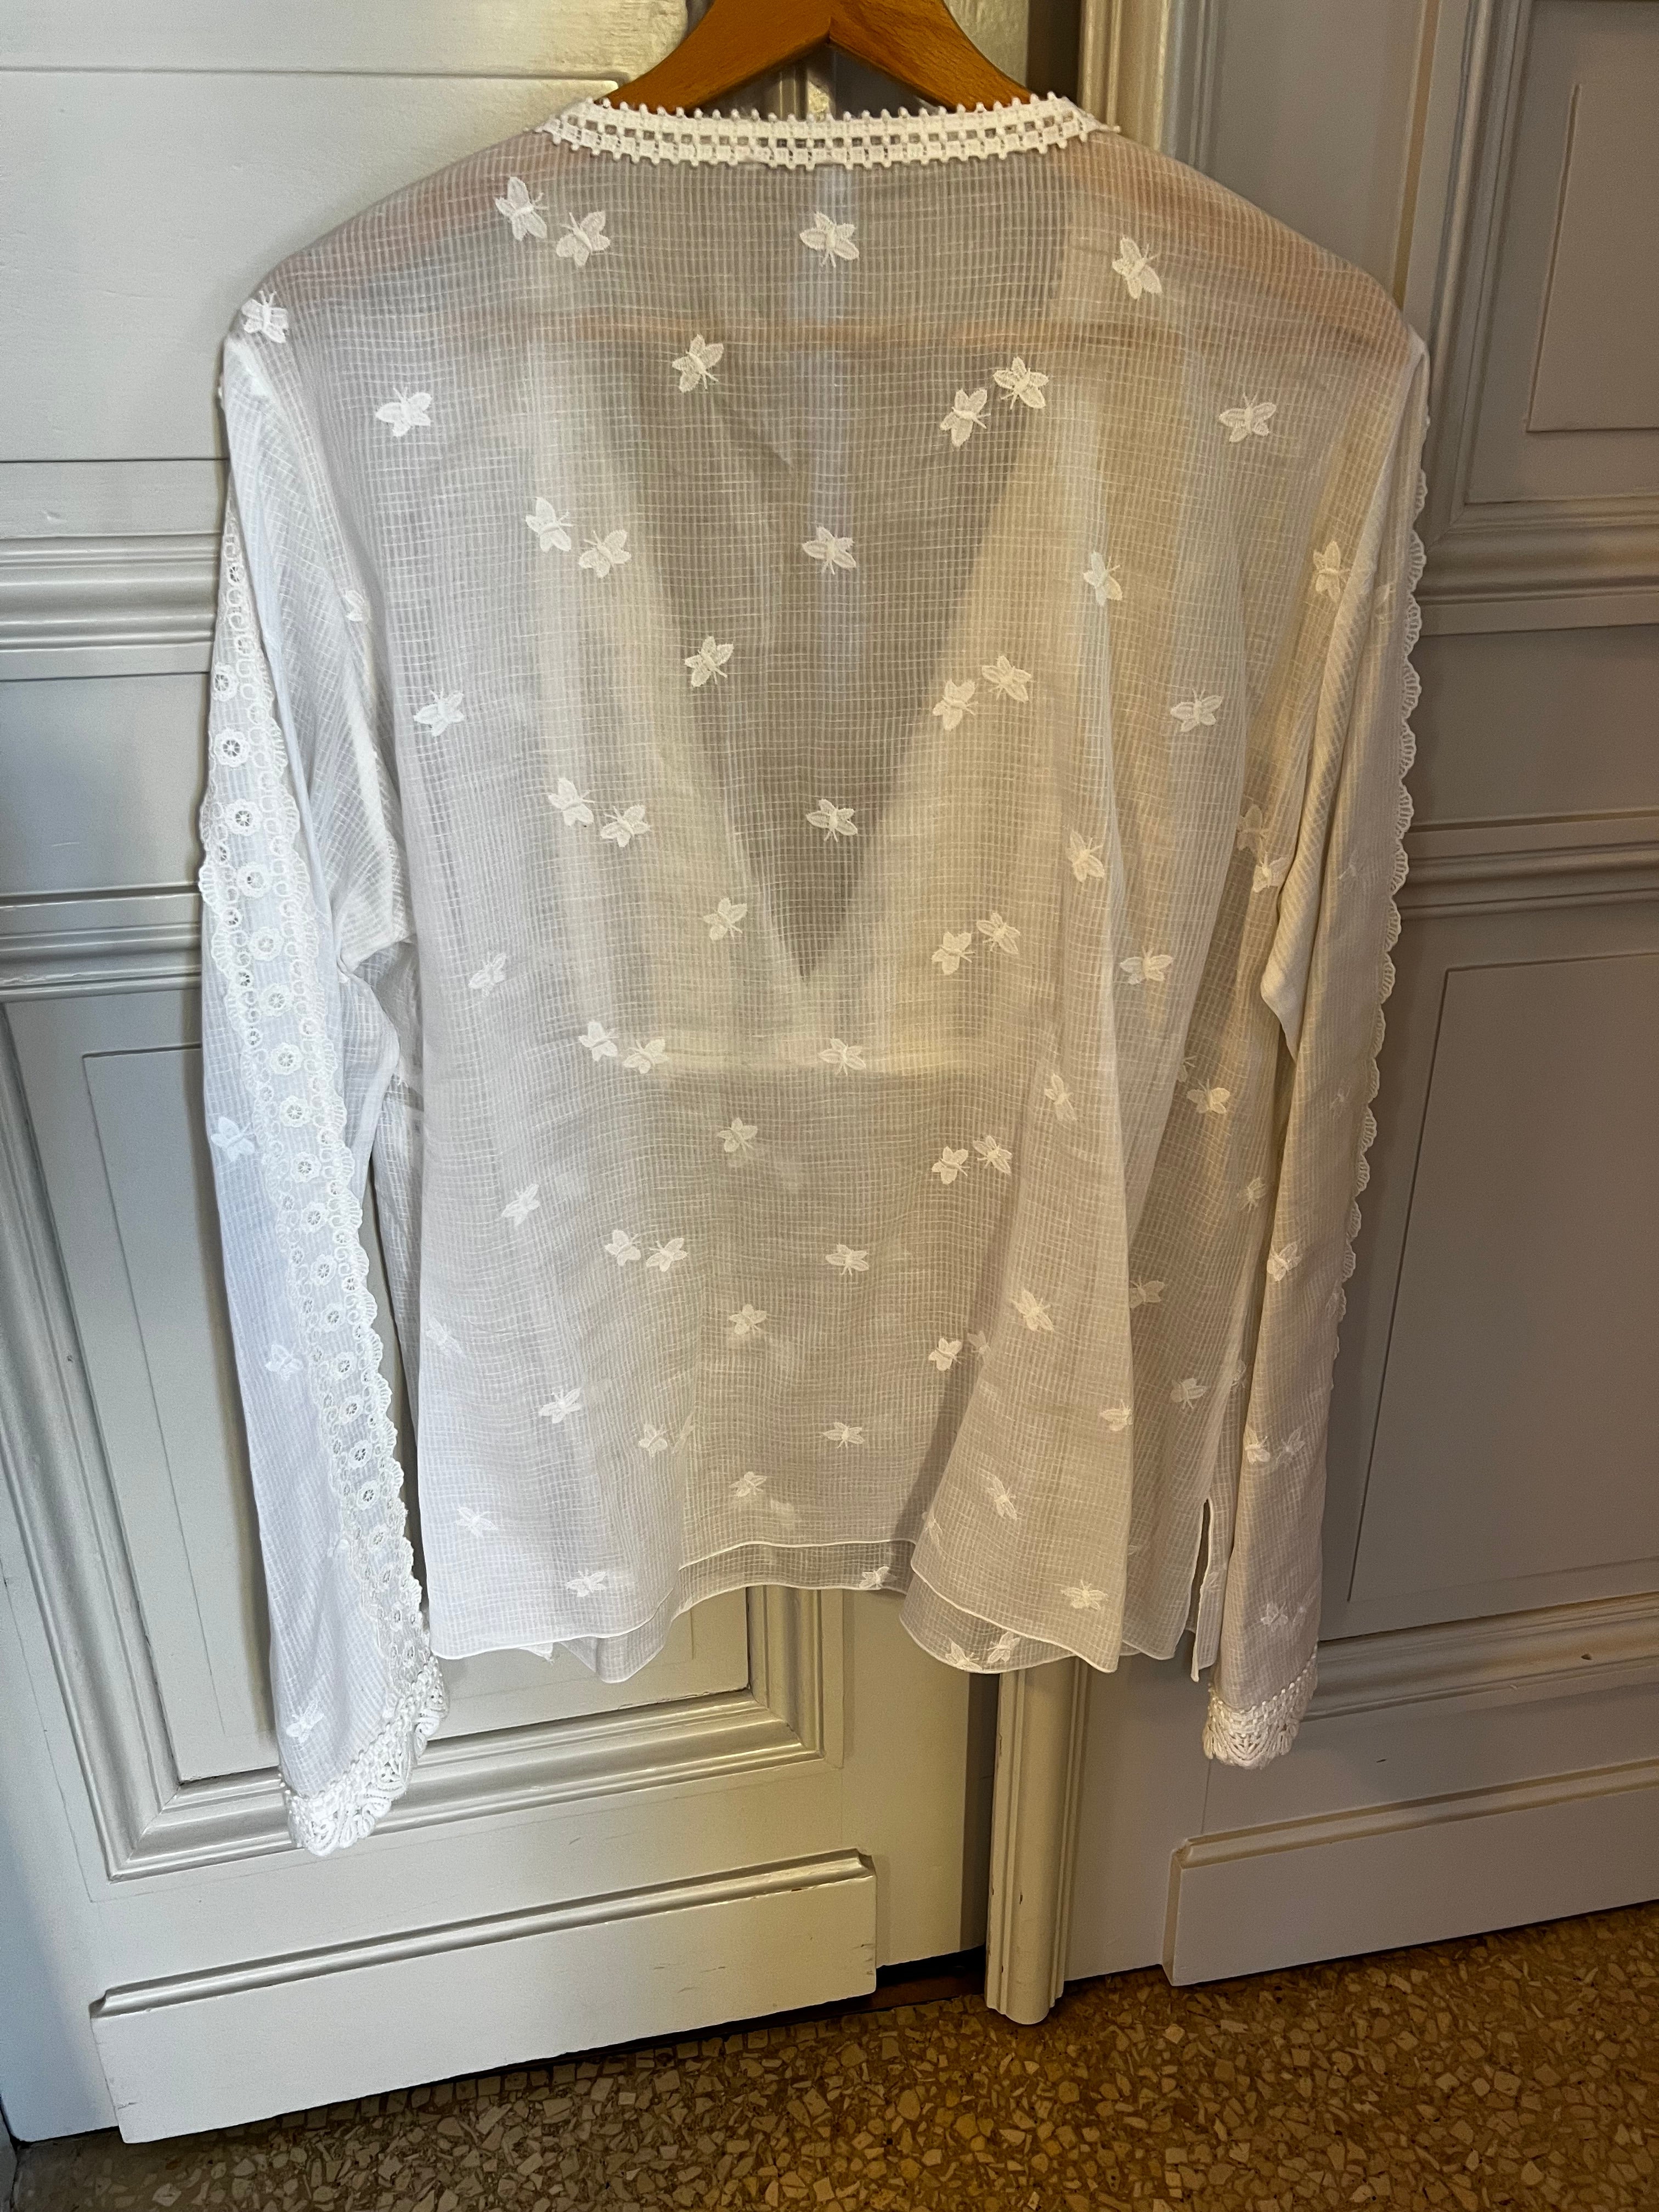 Blouse Andrew Gn blanche